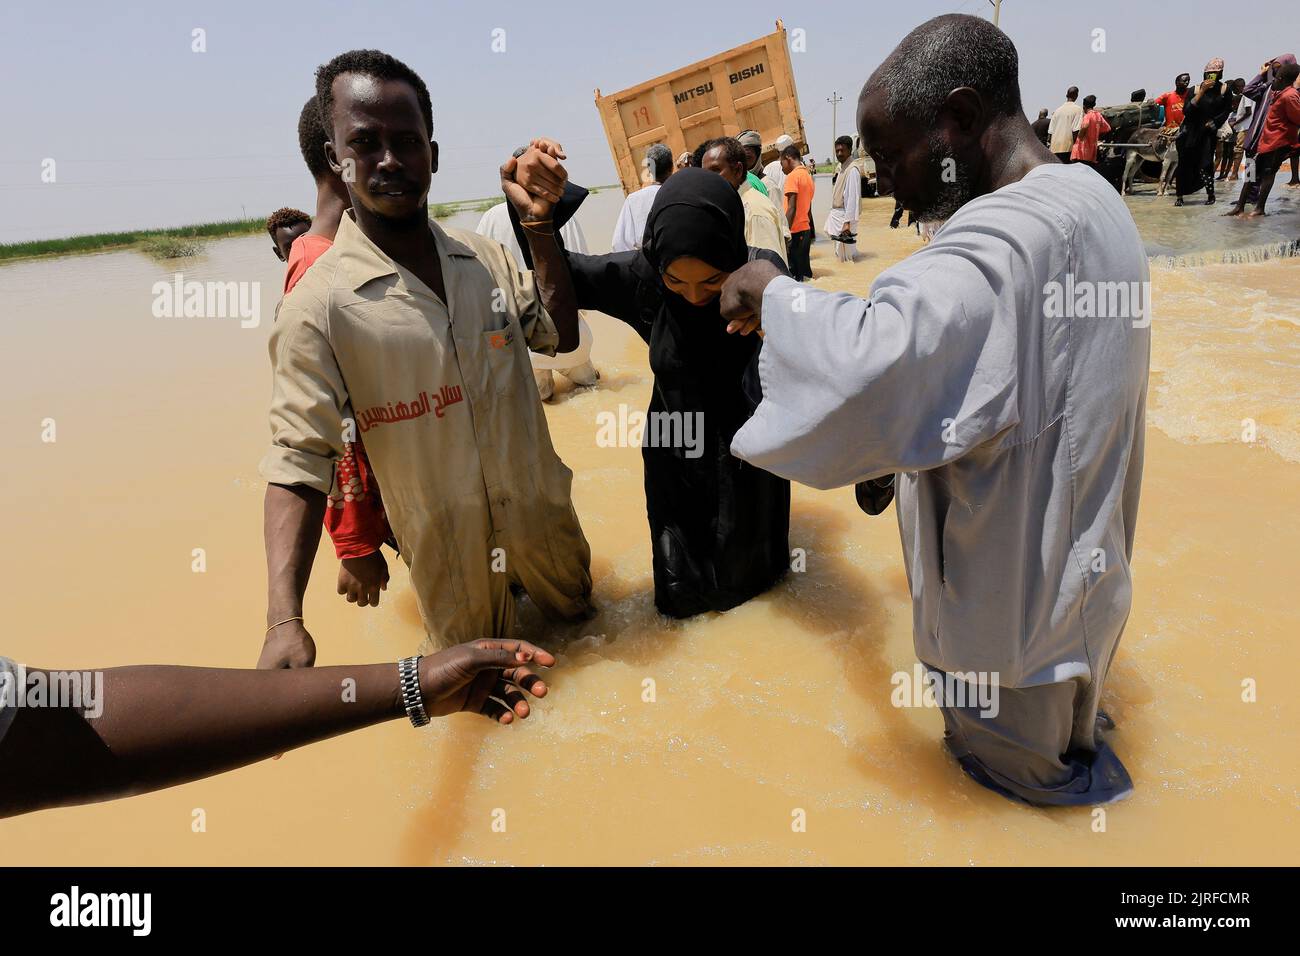 People cross the water during a flood in Al-Managil locality, Sudan, August 23, 2022. REUTERS/Mohamed Nureldin Abdallah Stock Photo